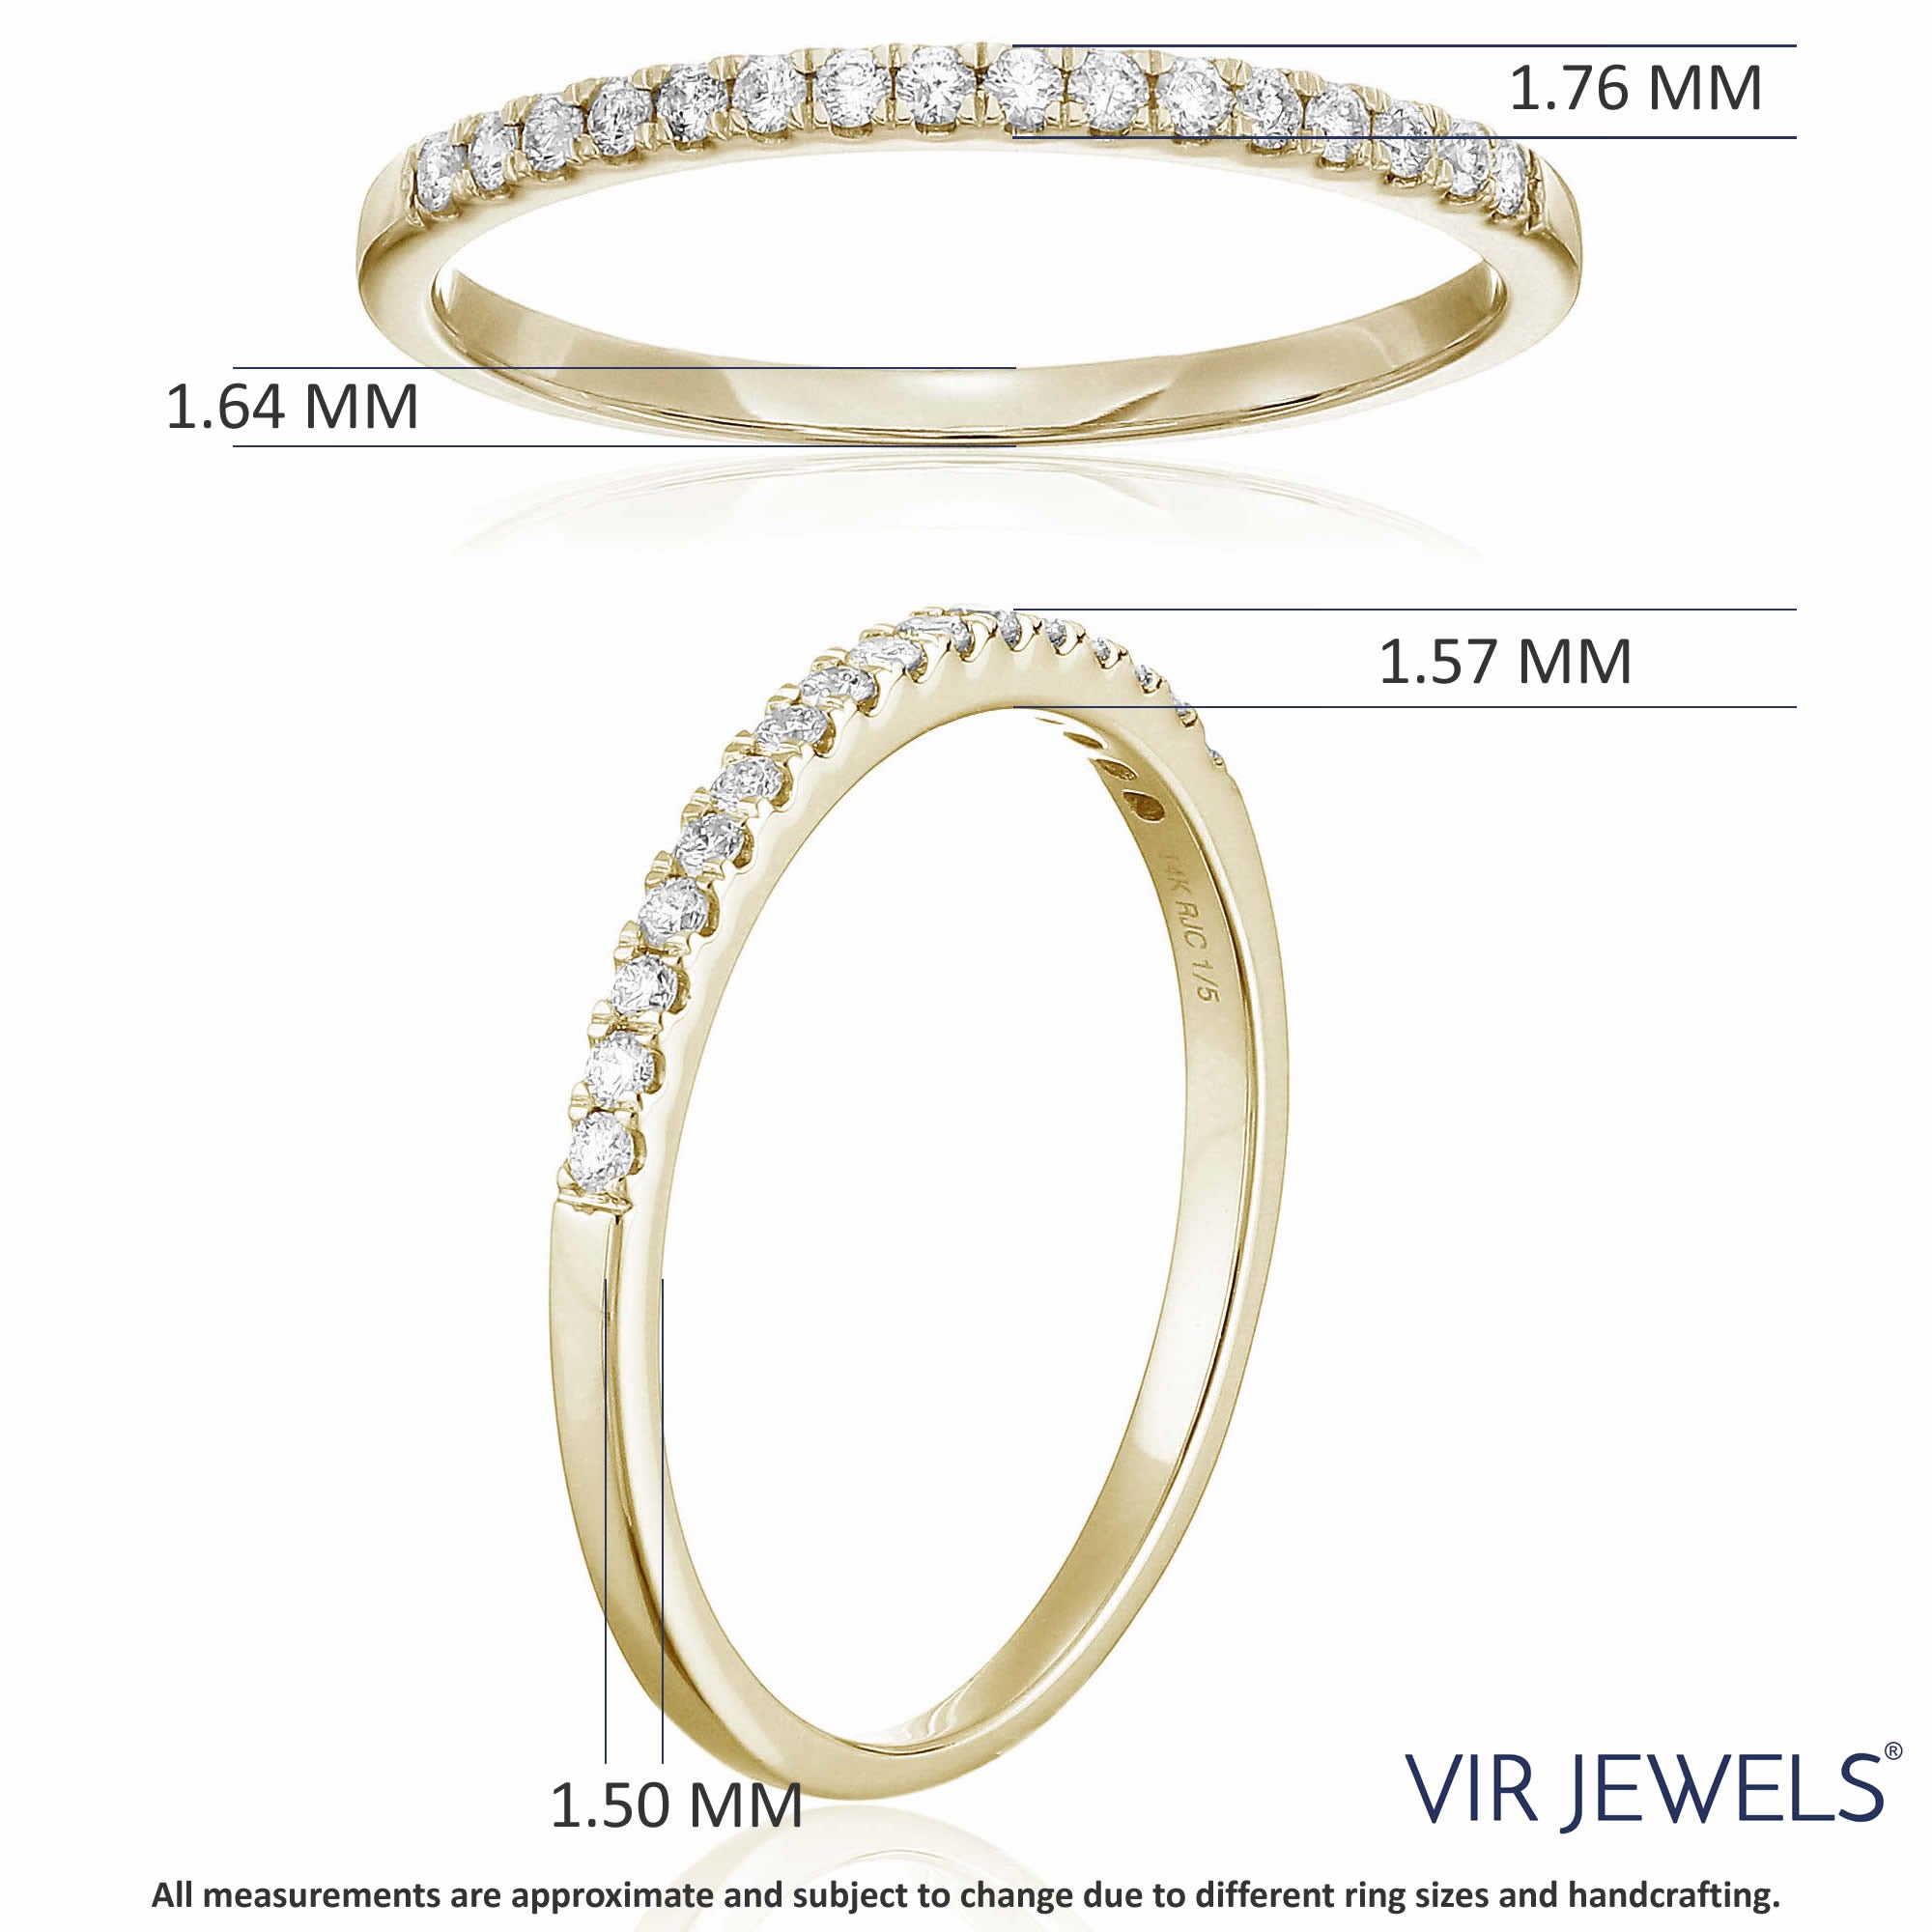 1/5 cttw Pave Round Diamond Wedding Band for Women in 14K Yellow Gold Prong Set, Size 4.5-10